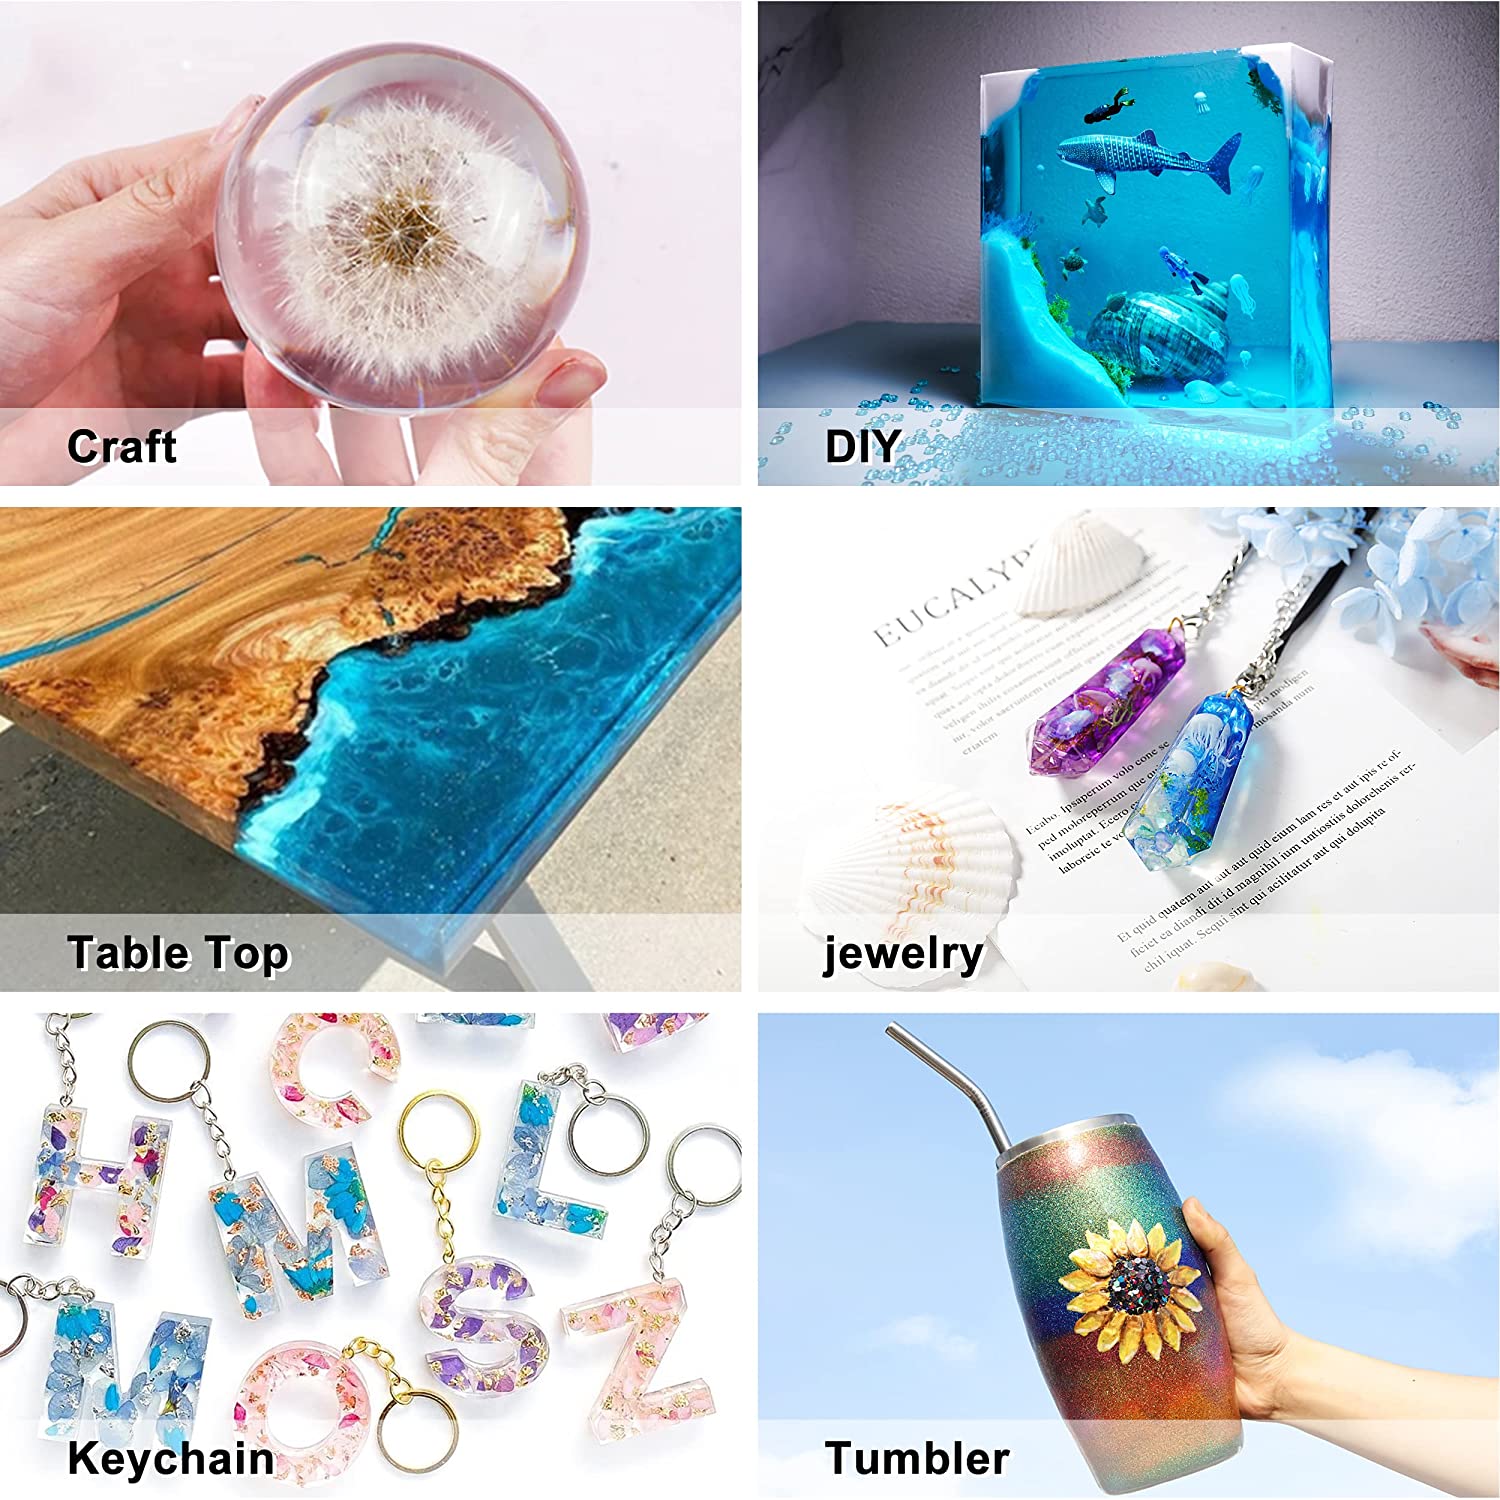 122ml Crystal Clear Epoxy Resin Kit, High Gloss & Bubbles Free Resin  Supplies For Coating And Casting, Craft DIY, Wood, Table Top, Bar Top,  Molds, River Tables Crafts.